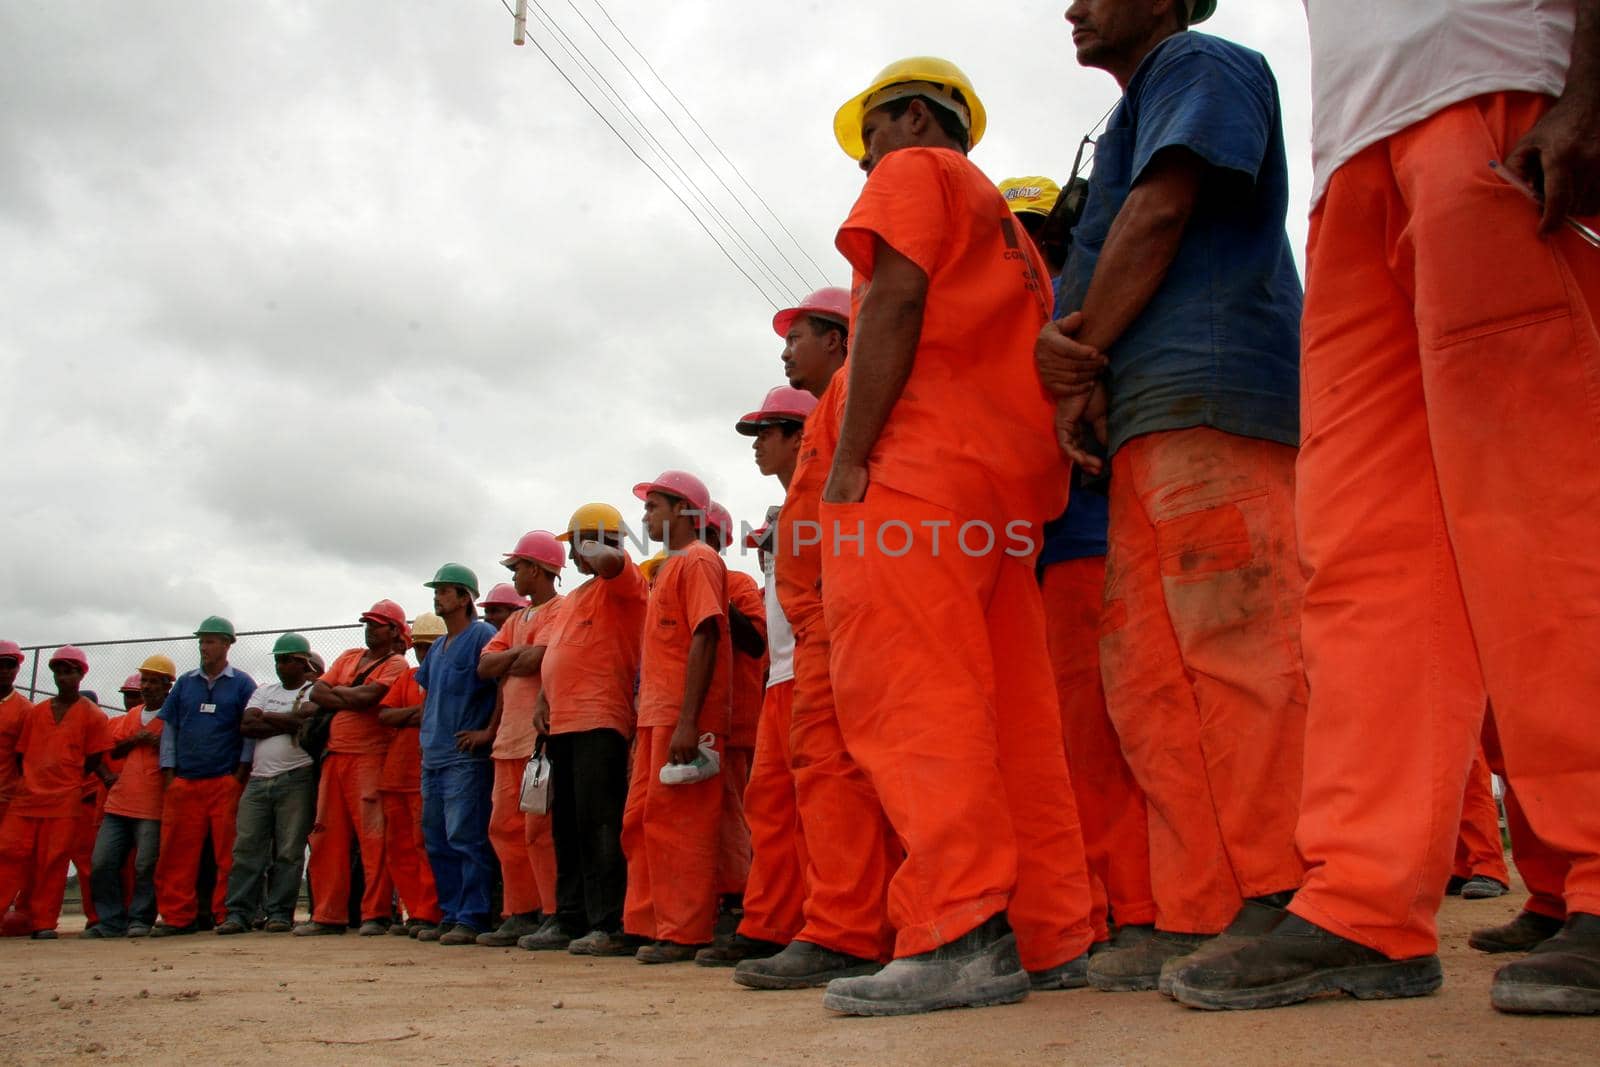 workers during strike period by joasouza